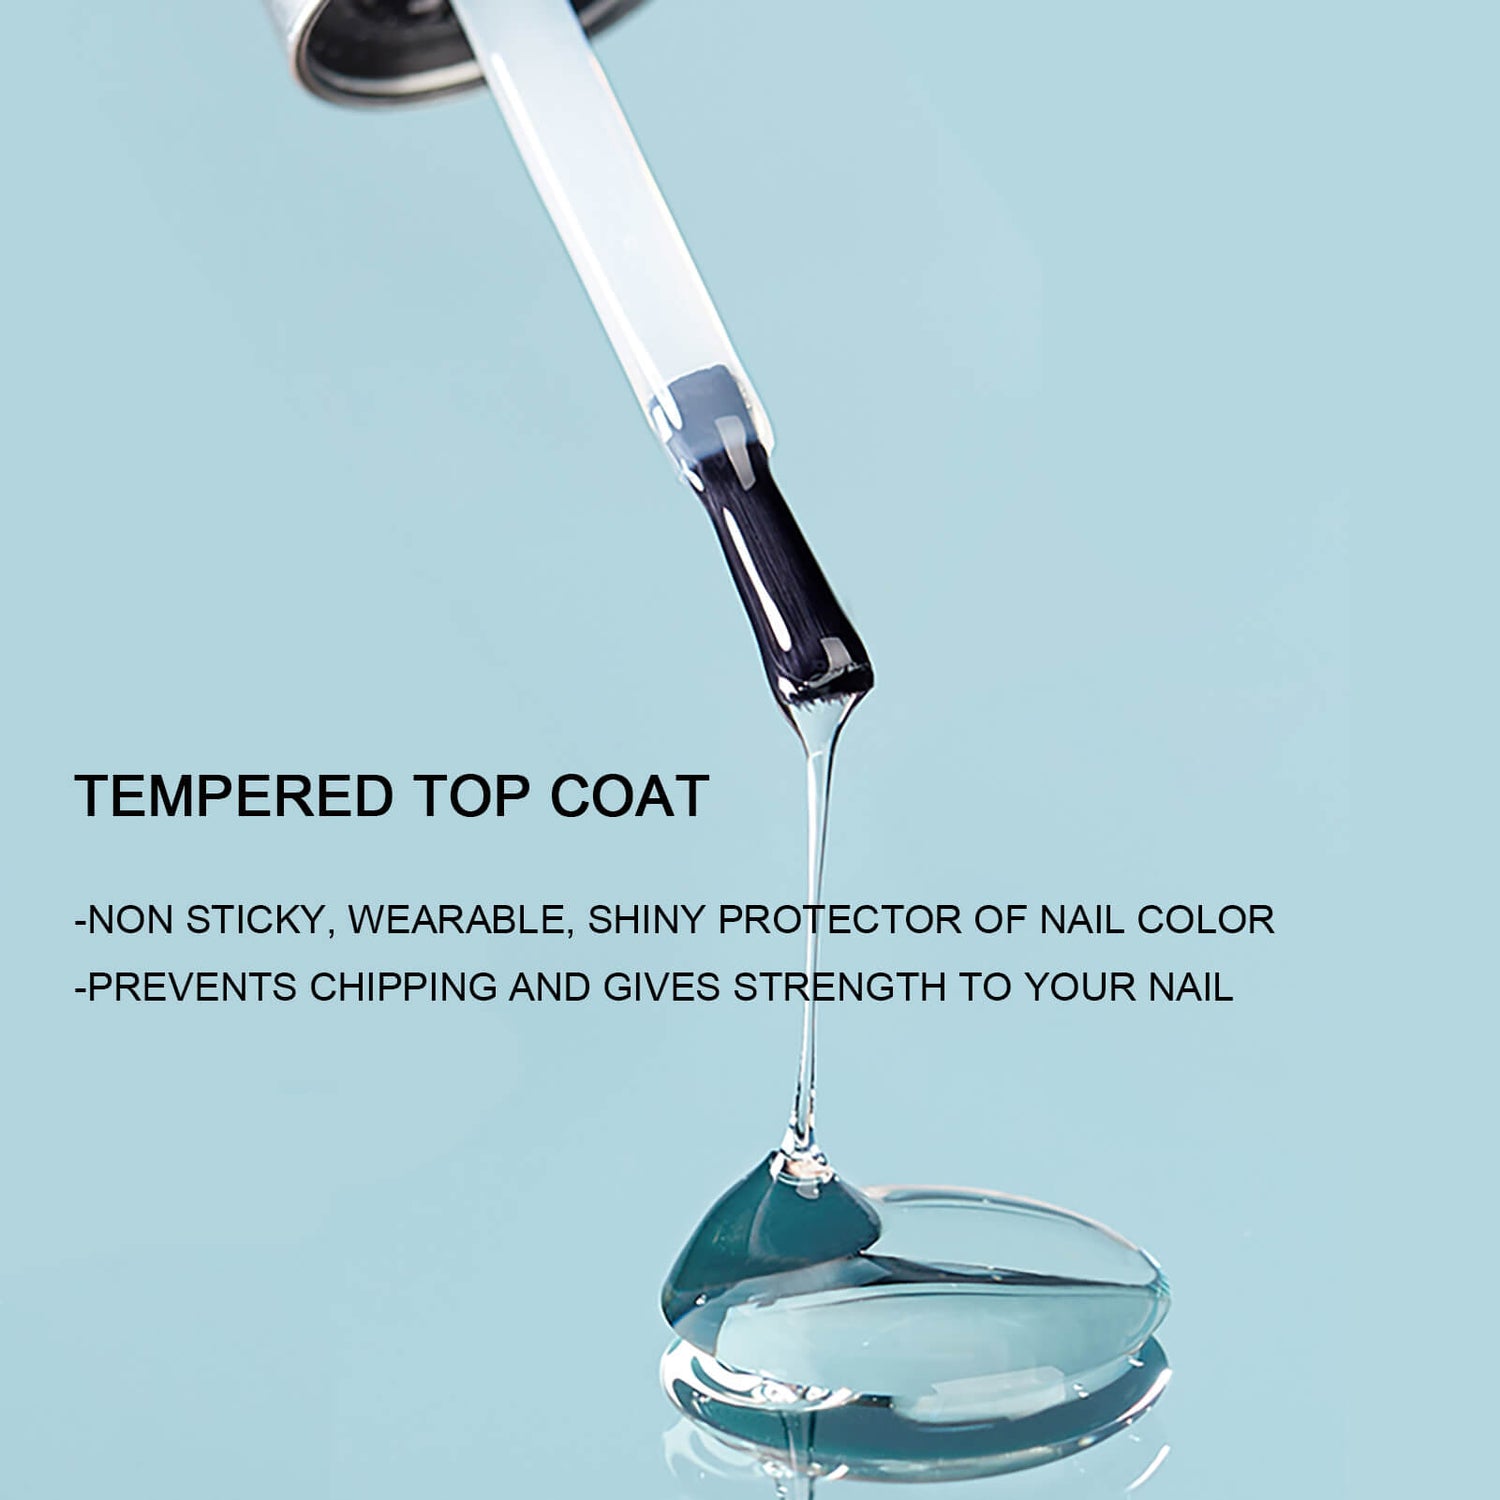 tempered-top-coat-function